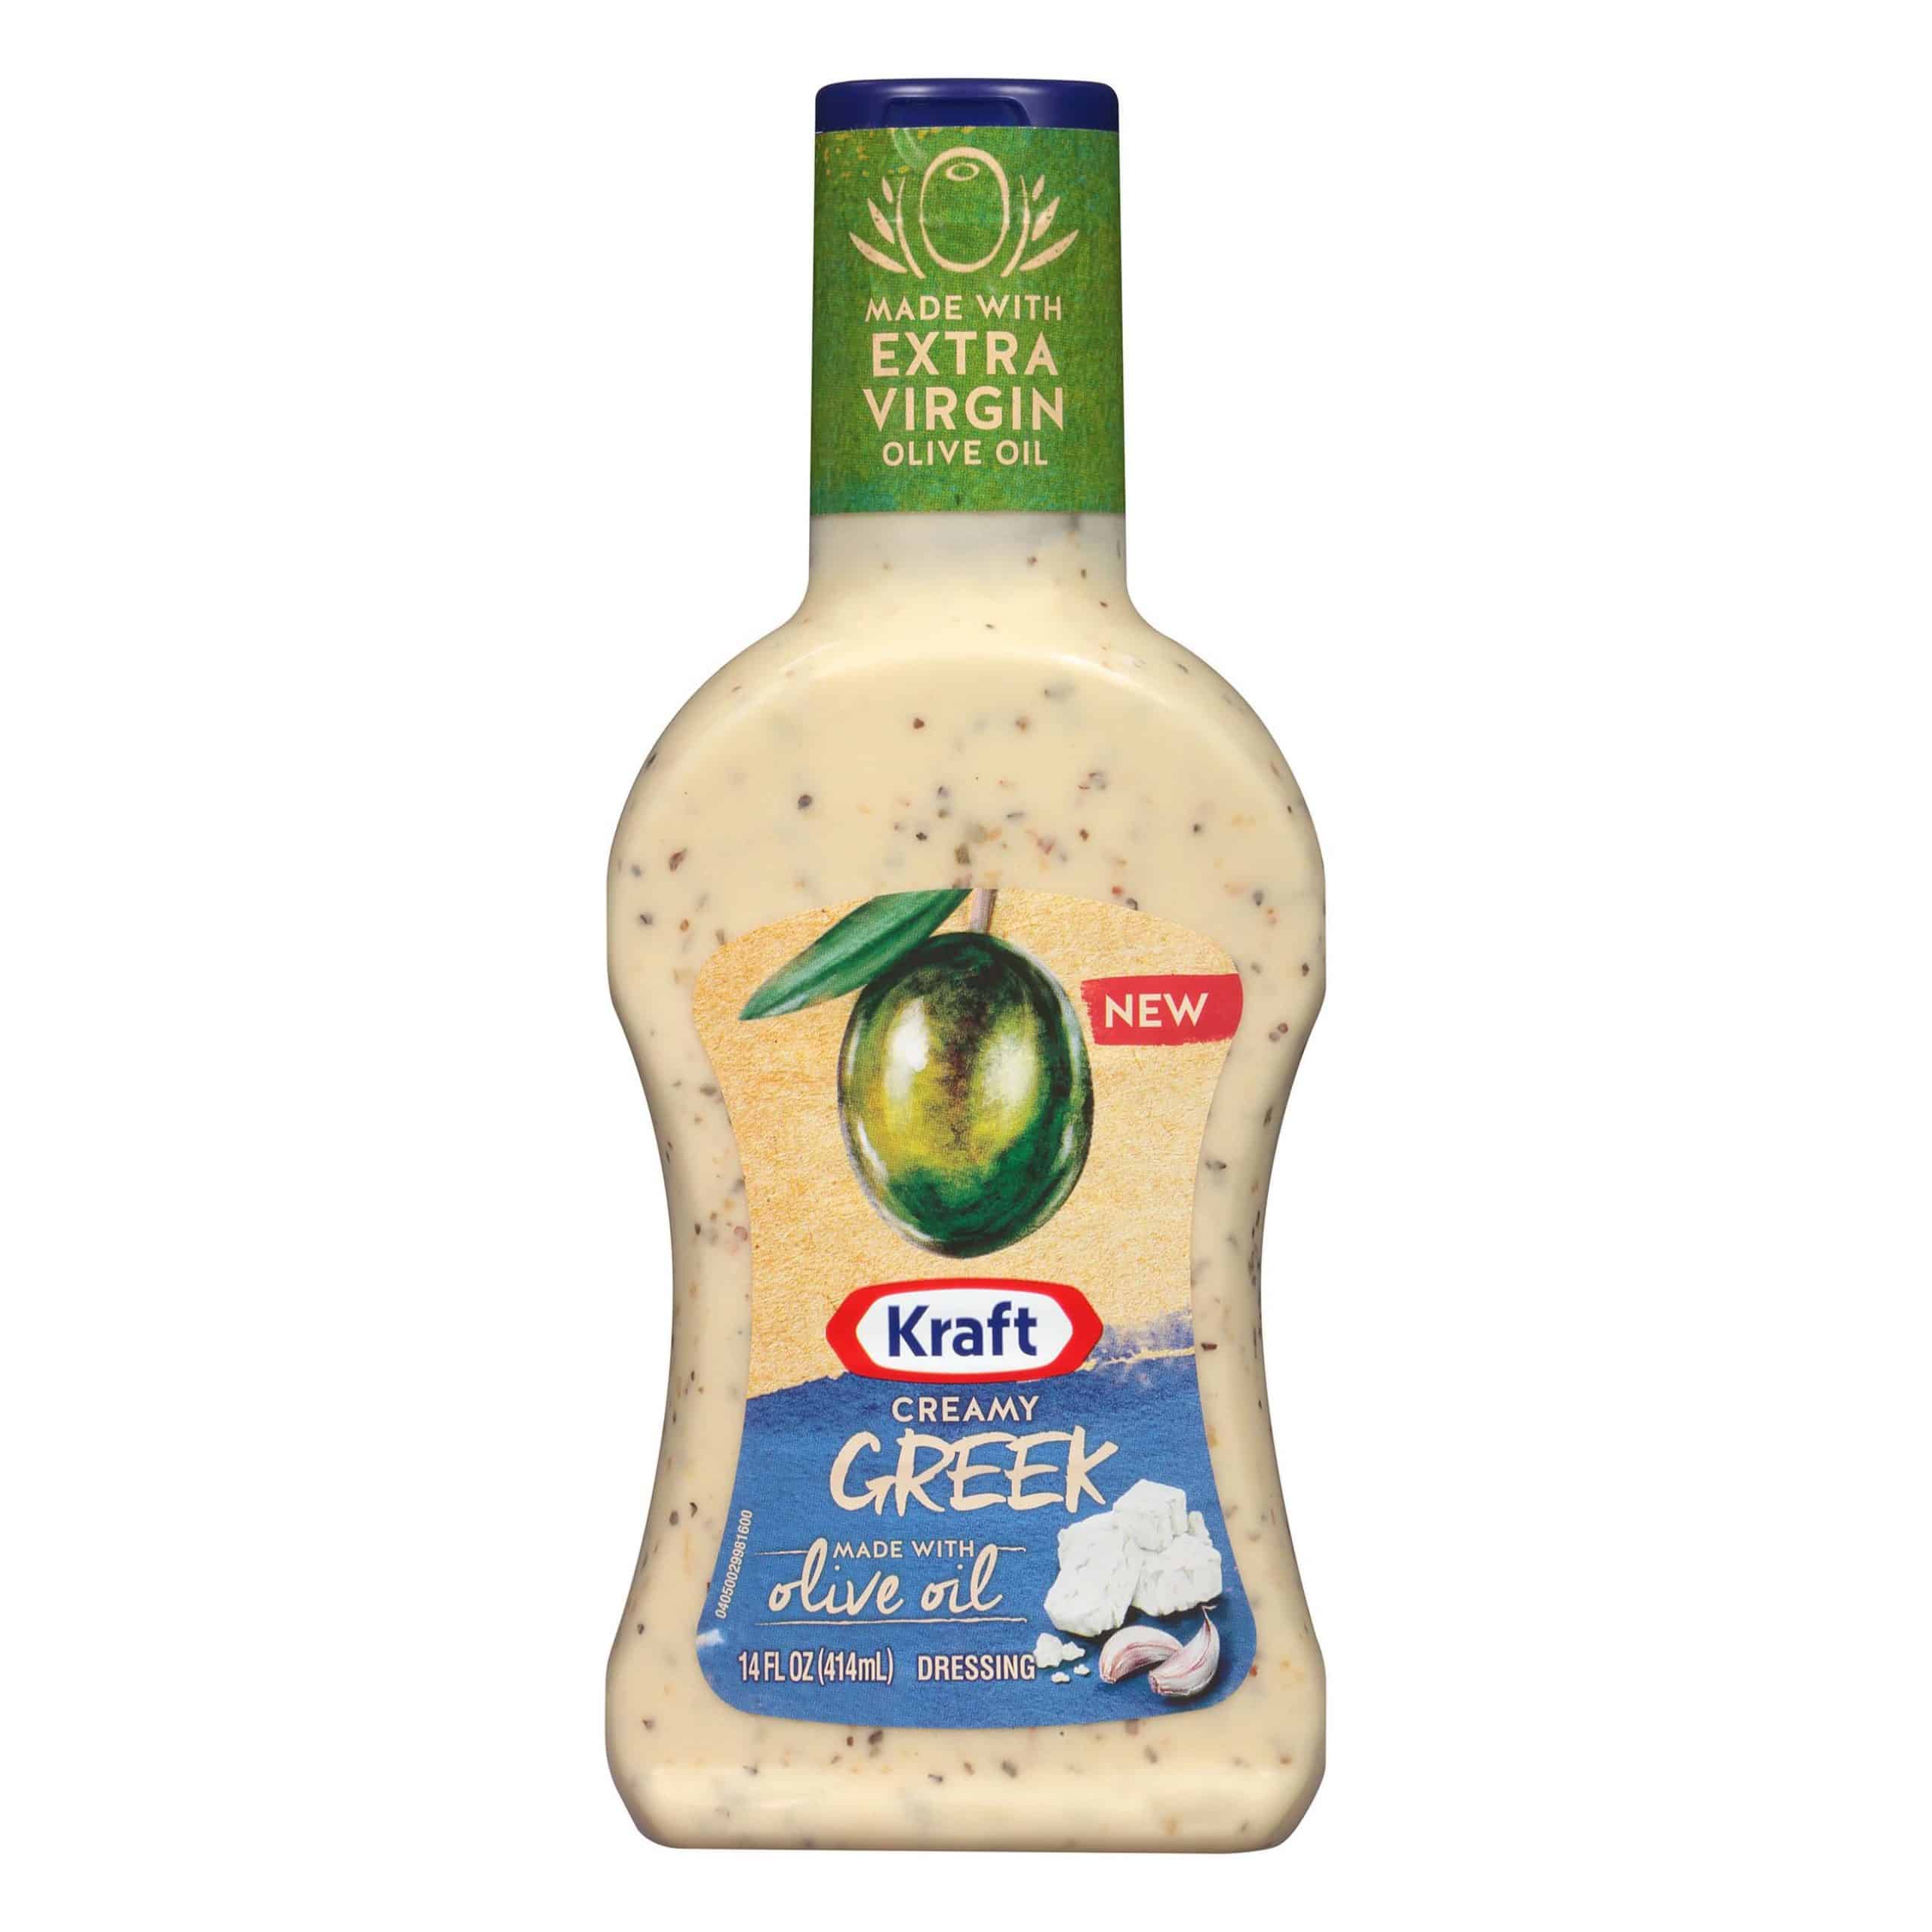 Kraft Creamy Greek Made with Olive Oil Dressing